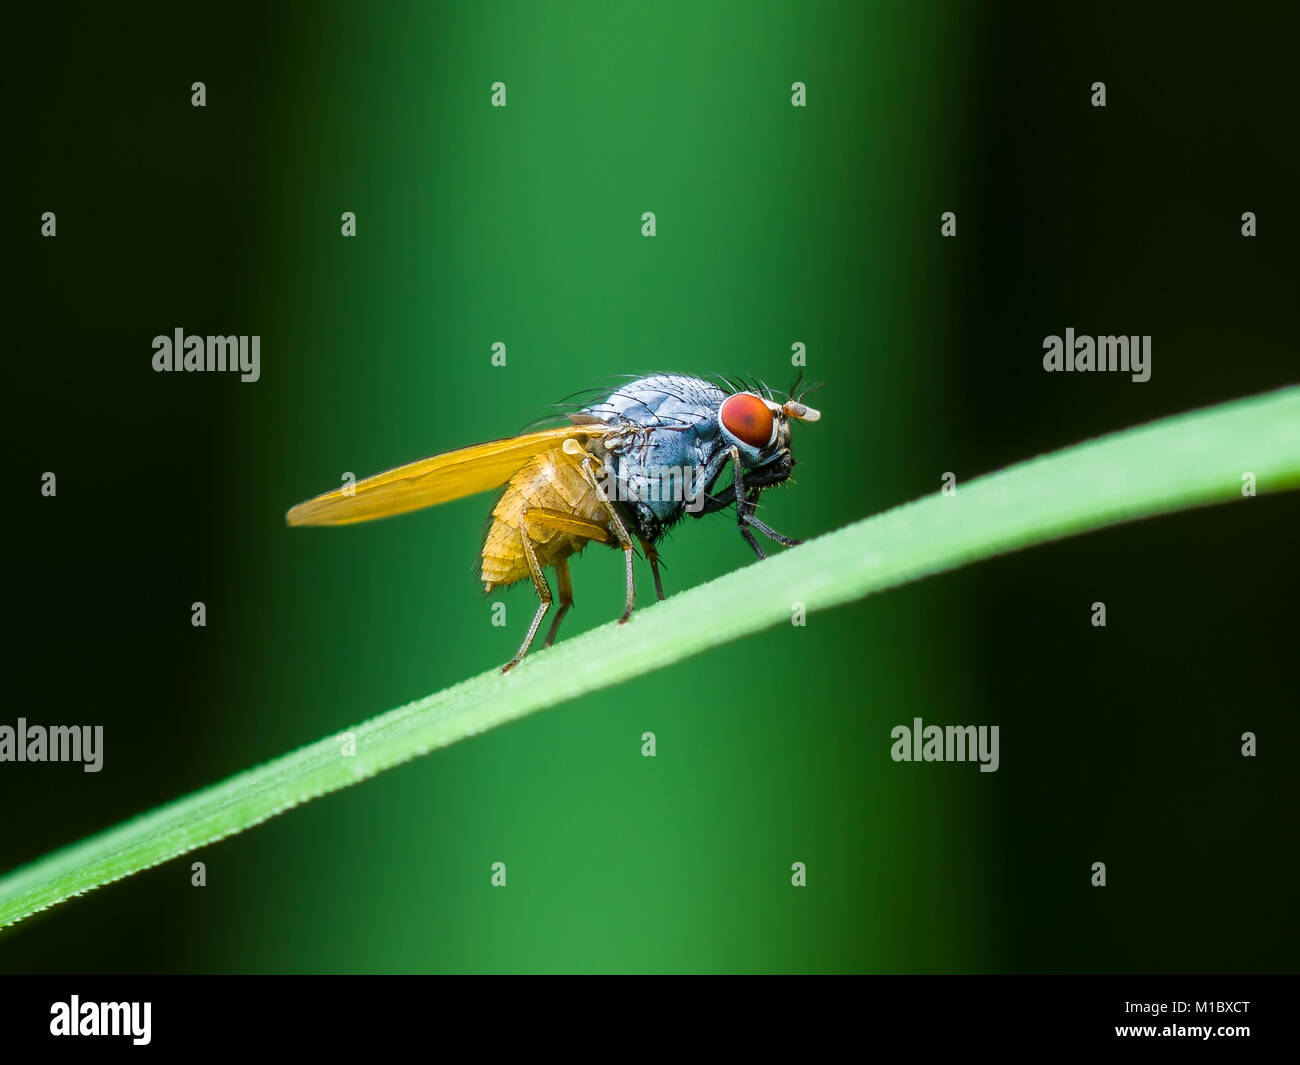 Drosophila Fruit Fly Diptera Insect on Green Grass Stock Photo